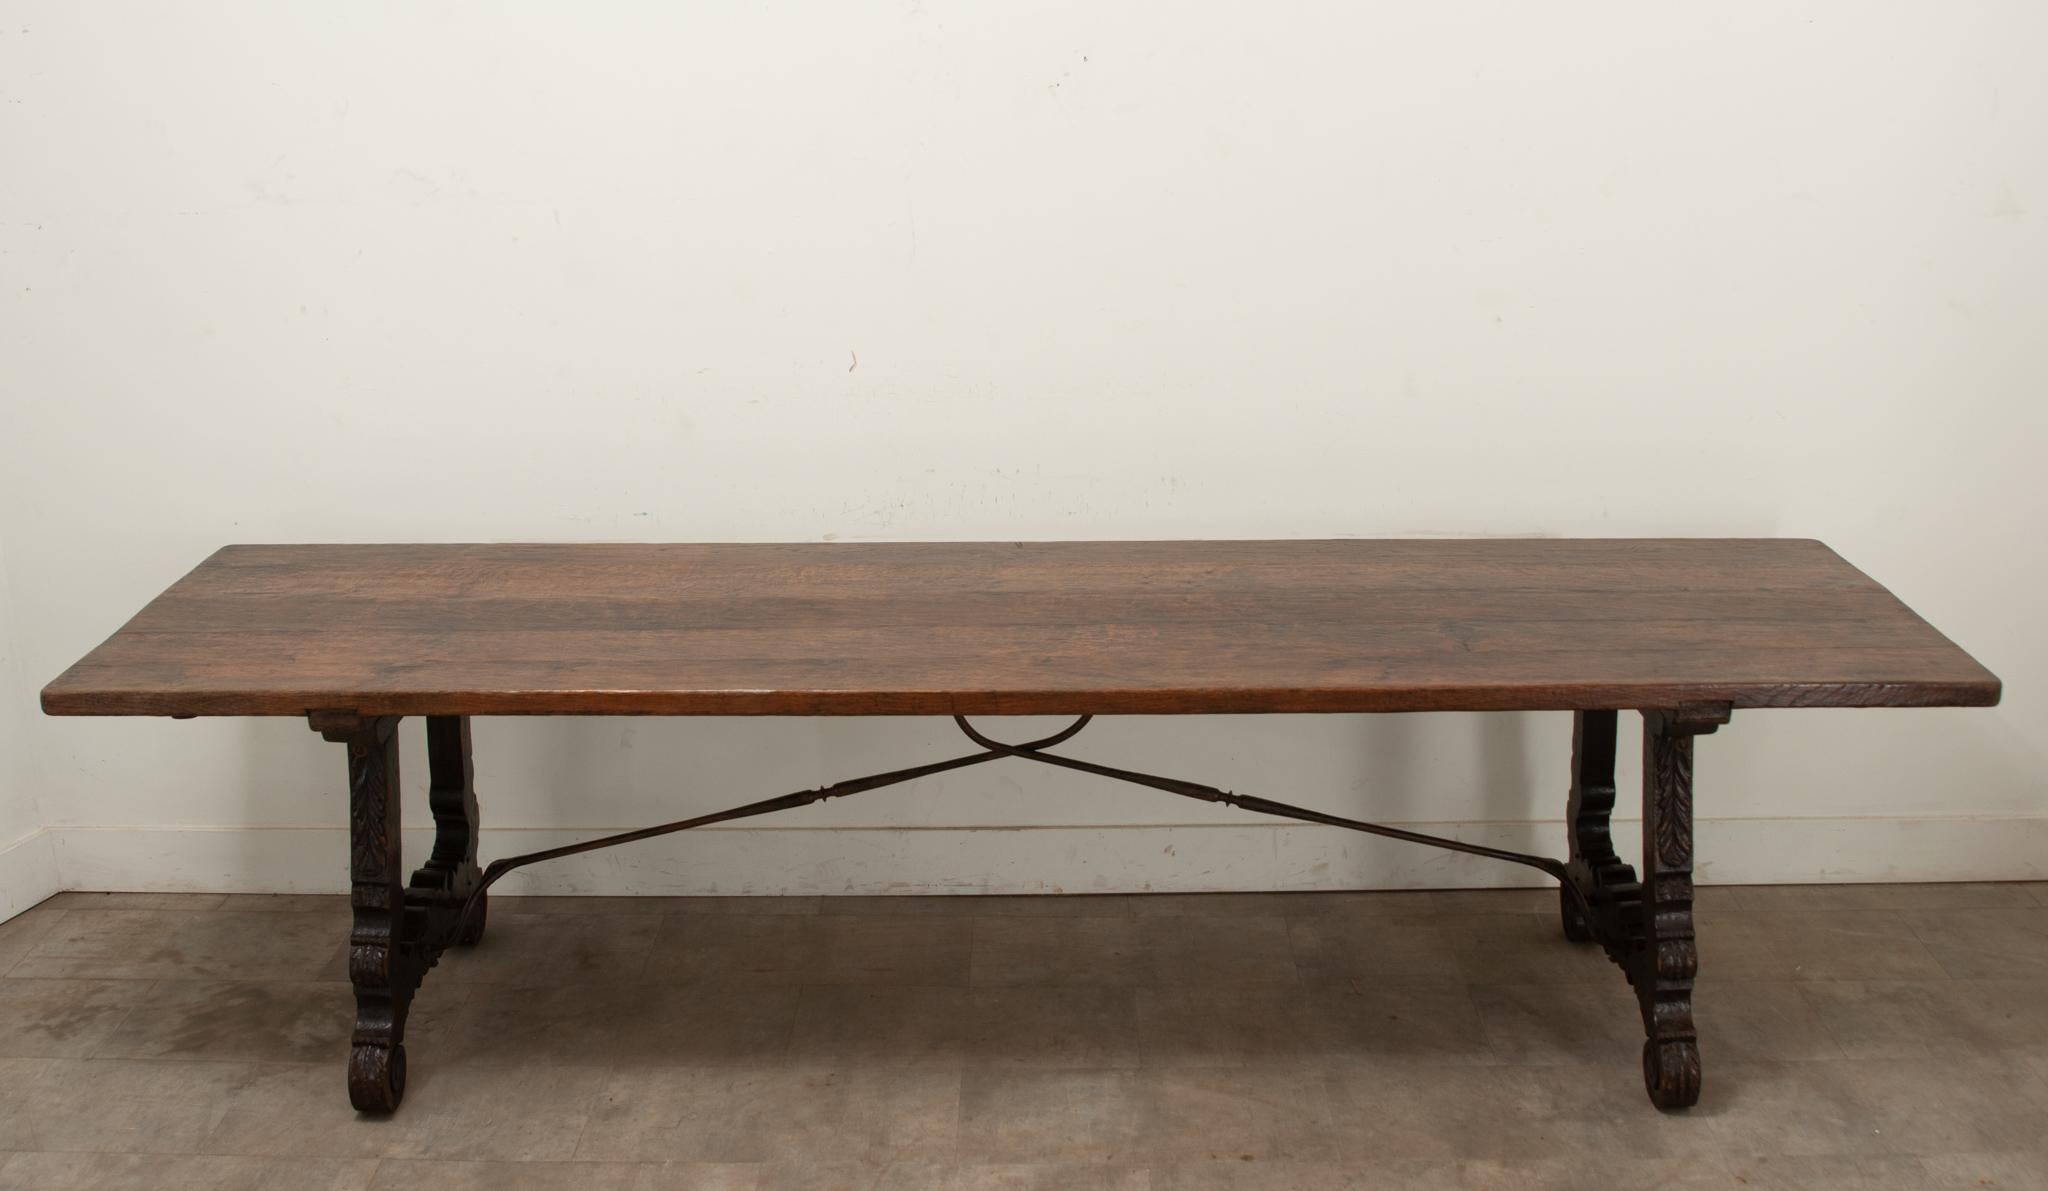 A large oak Spanish dining table extends to over twelve feet long. This table has a simple plank top over carved decorative legs connected by a hand forged iron support. At each end you’ll find iron brackets under the table top that the removable